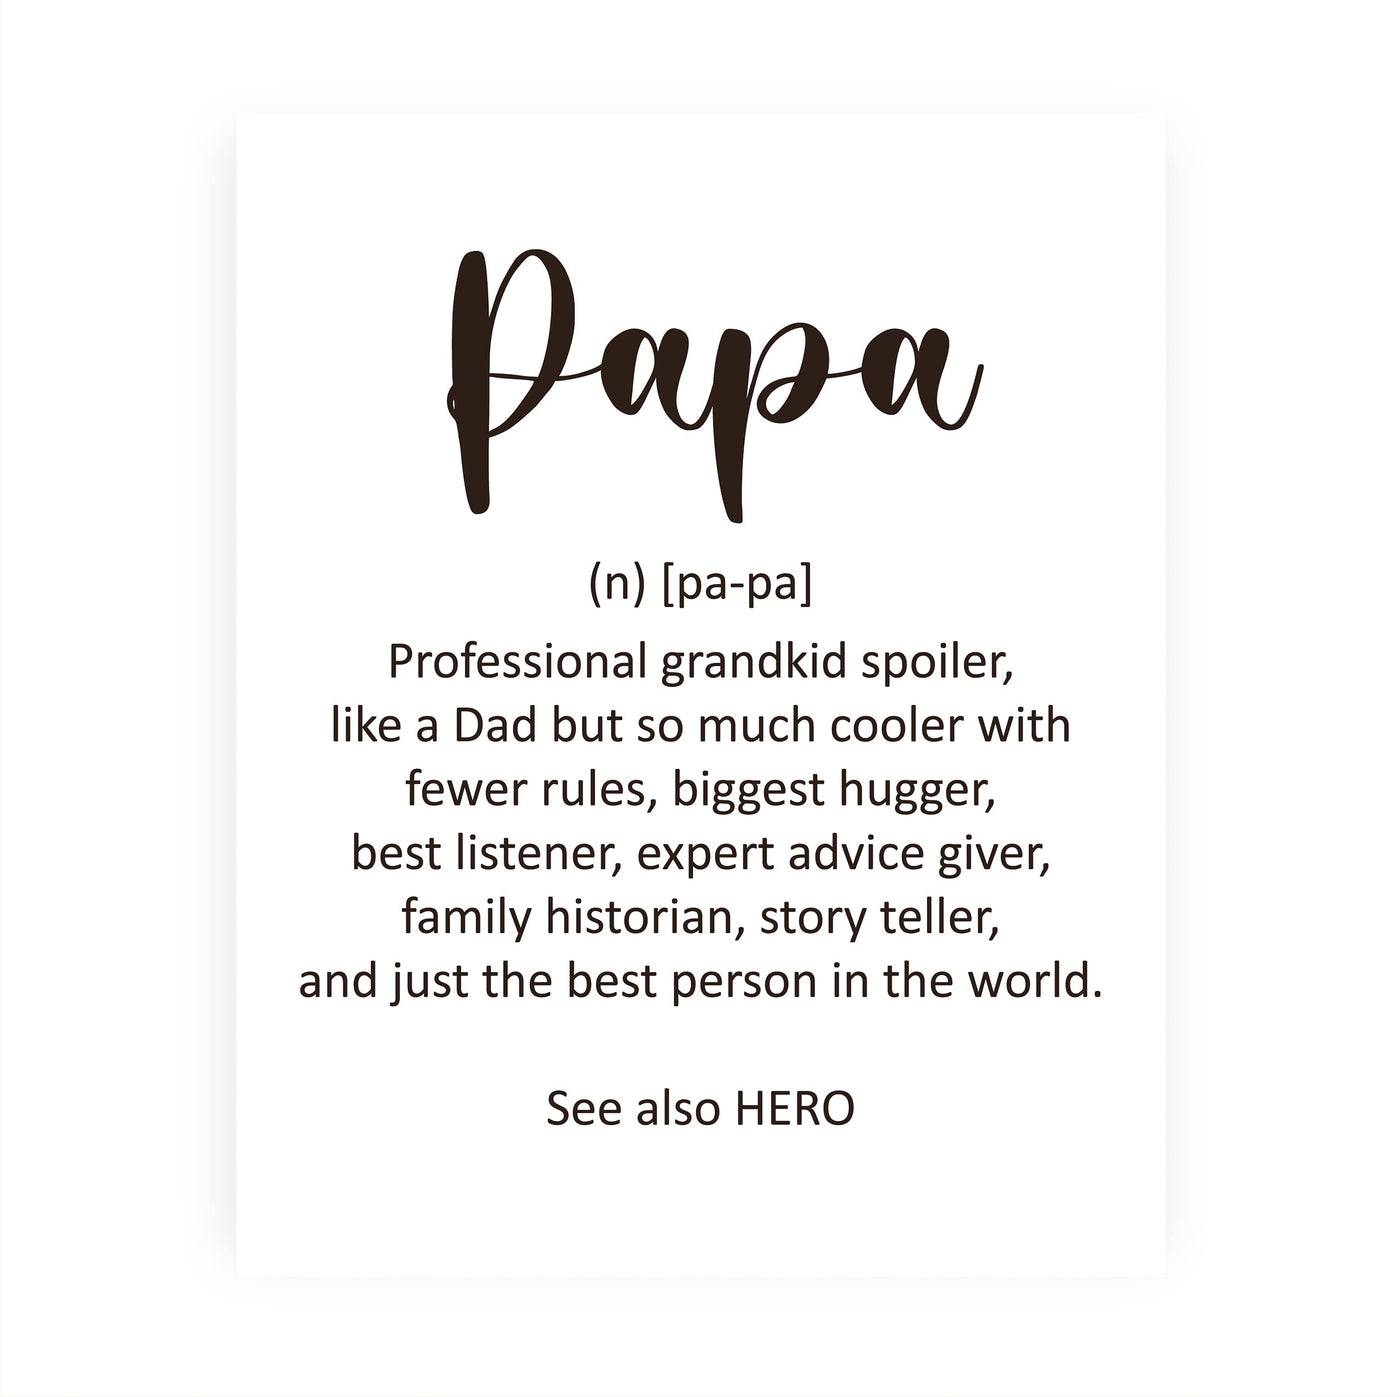 Papa-See Also Hero Inspirational Family Wall Decor Sign -8 x 10" Rustic Grandpa Print -Ready to Frame. Funny Decor for Home-Office-Family Room-Grandparents. Great Gift for All Grandpas & Papas!